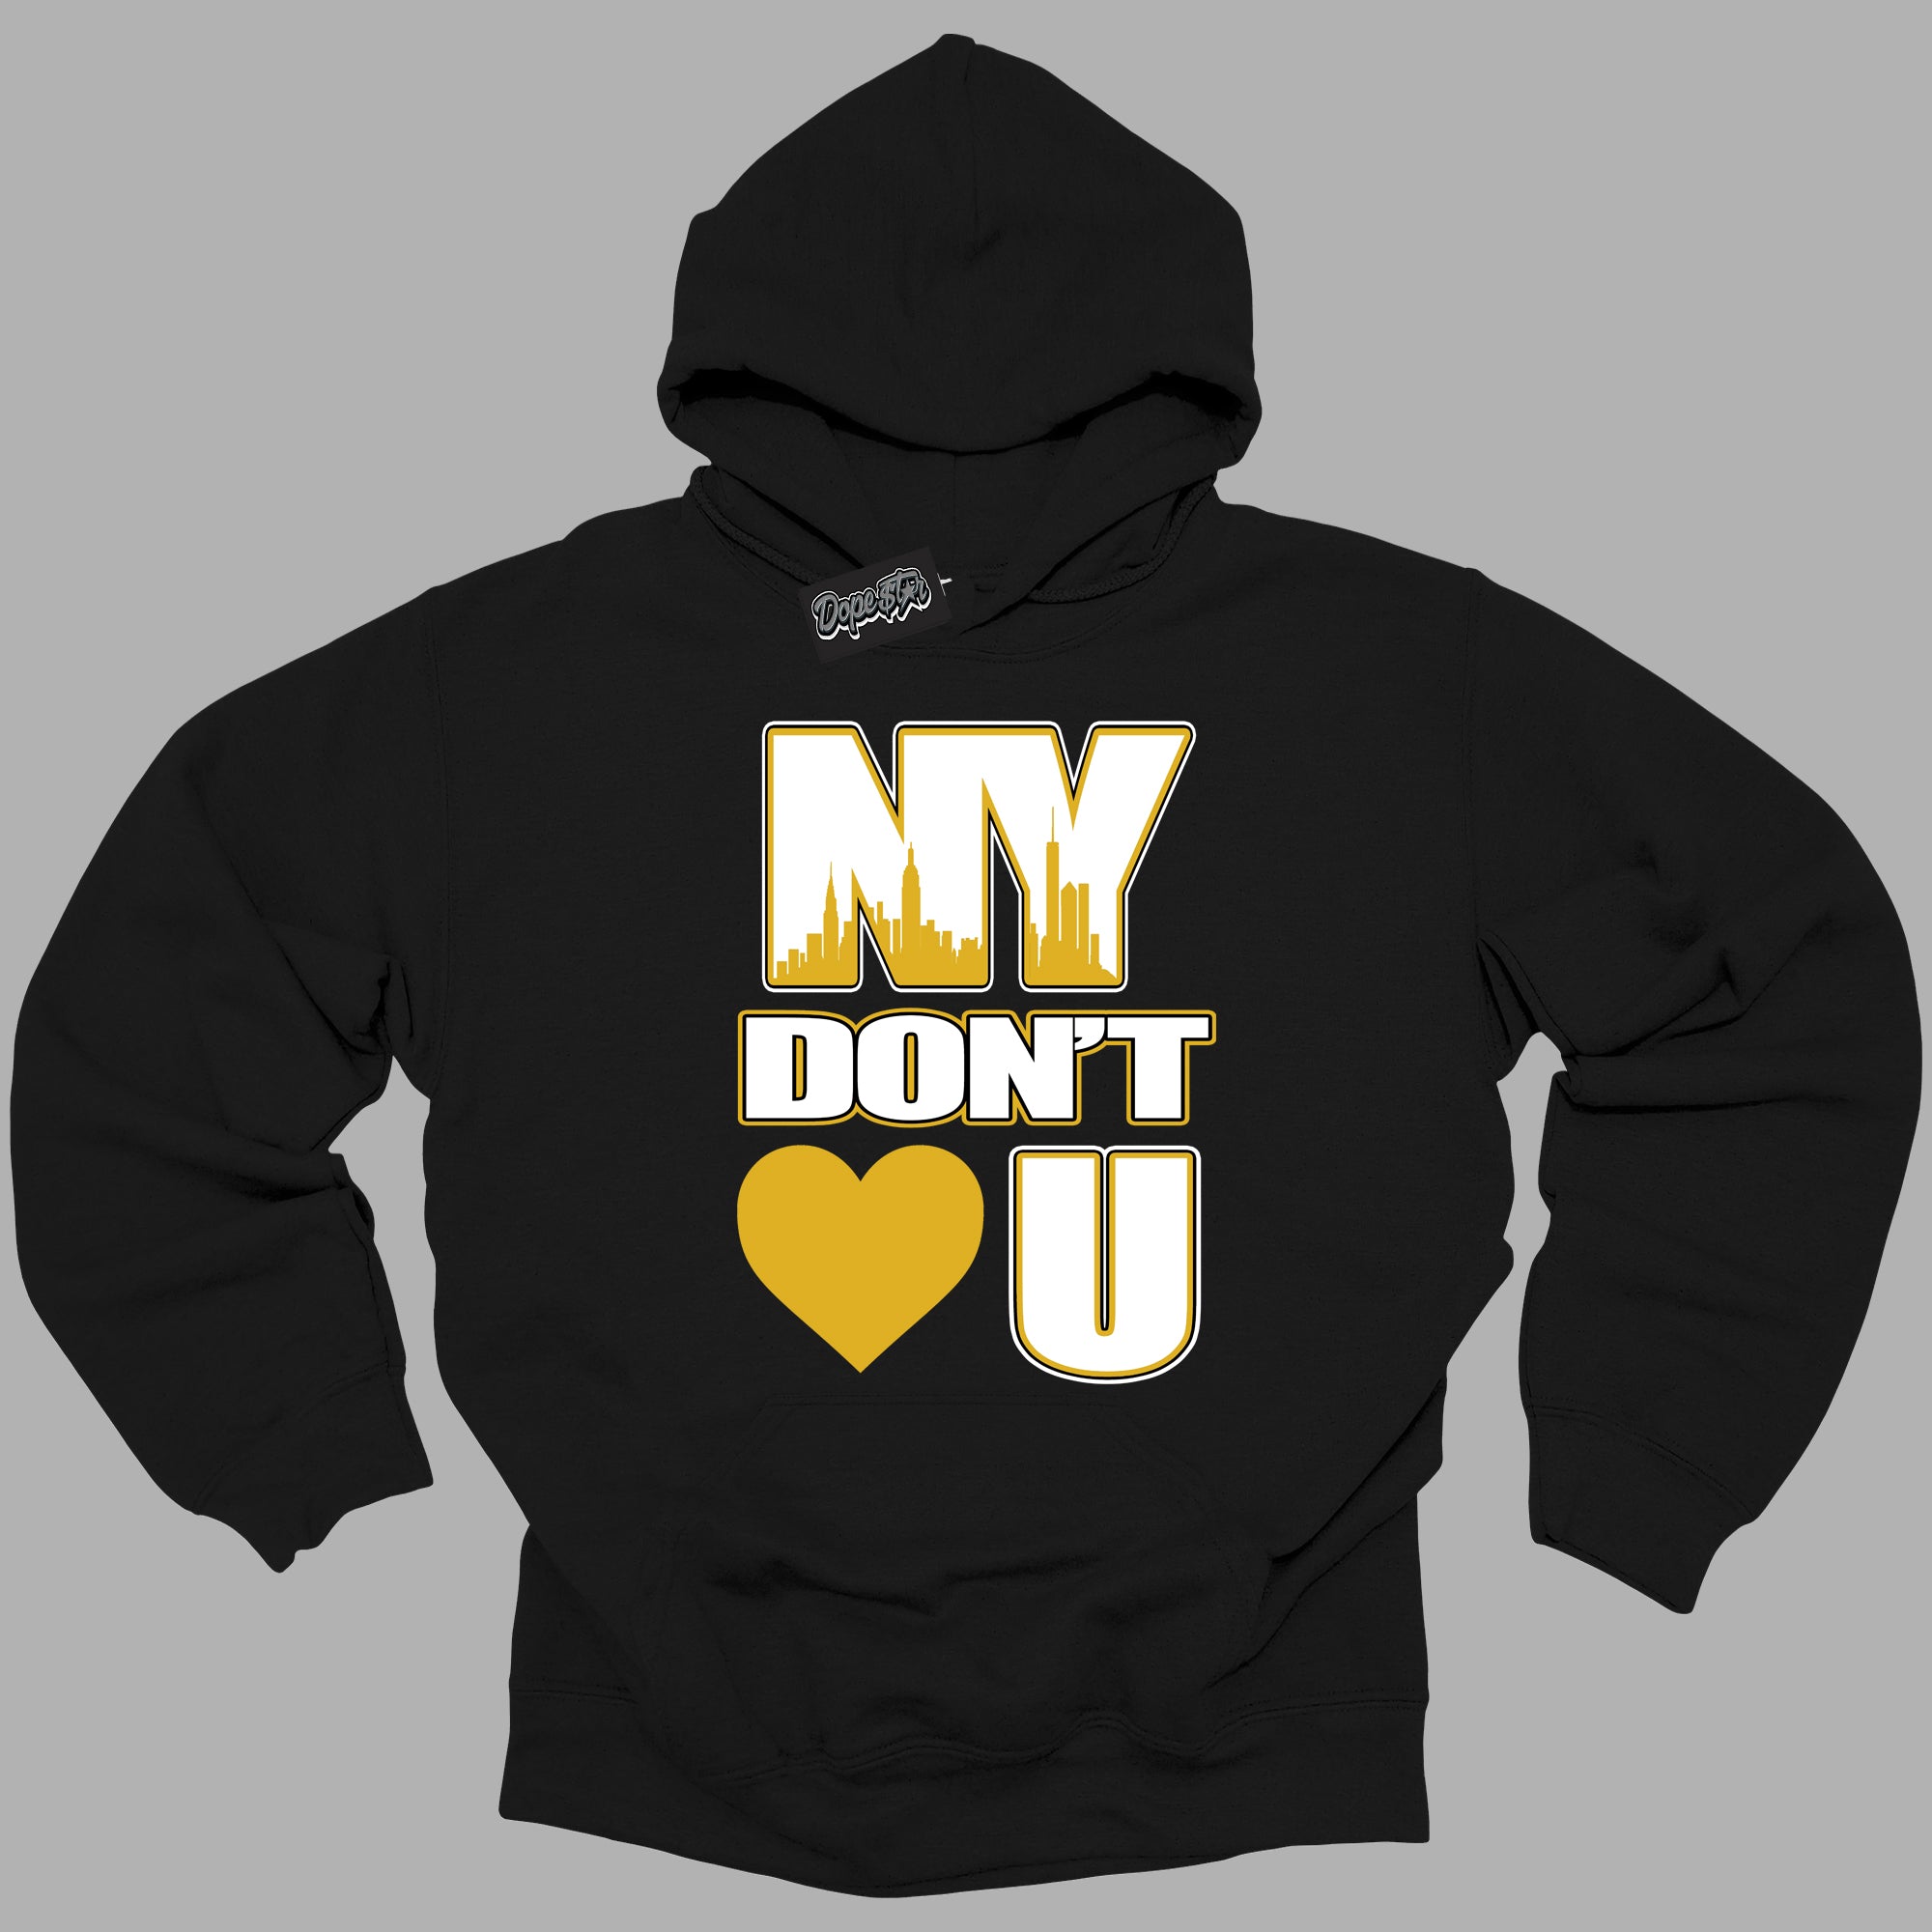 Cool Black Hoodie with “ NY Don't Love You ”  design that Perfectly Matches Yellow Ochre 6s Sneakers.